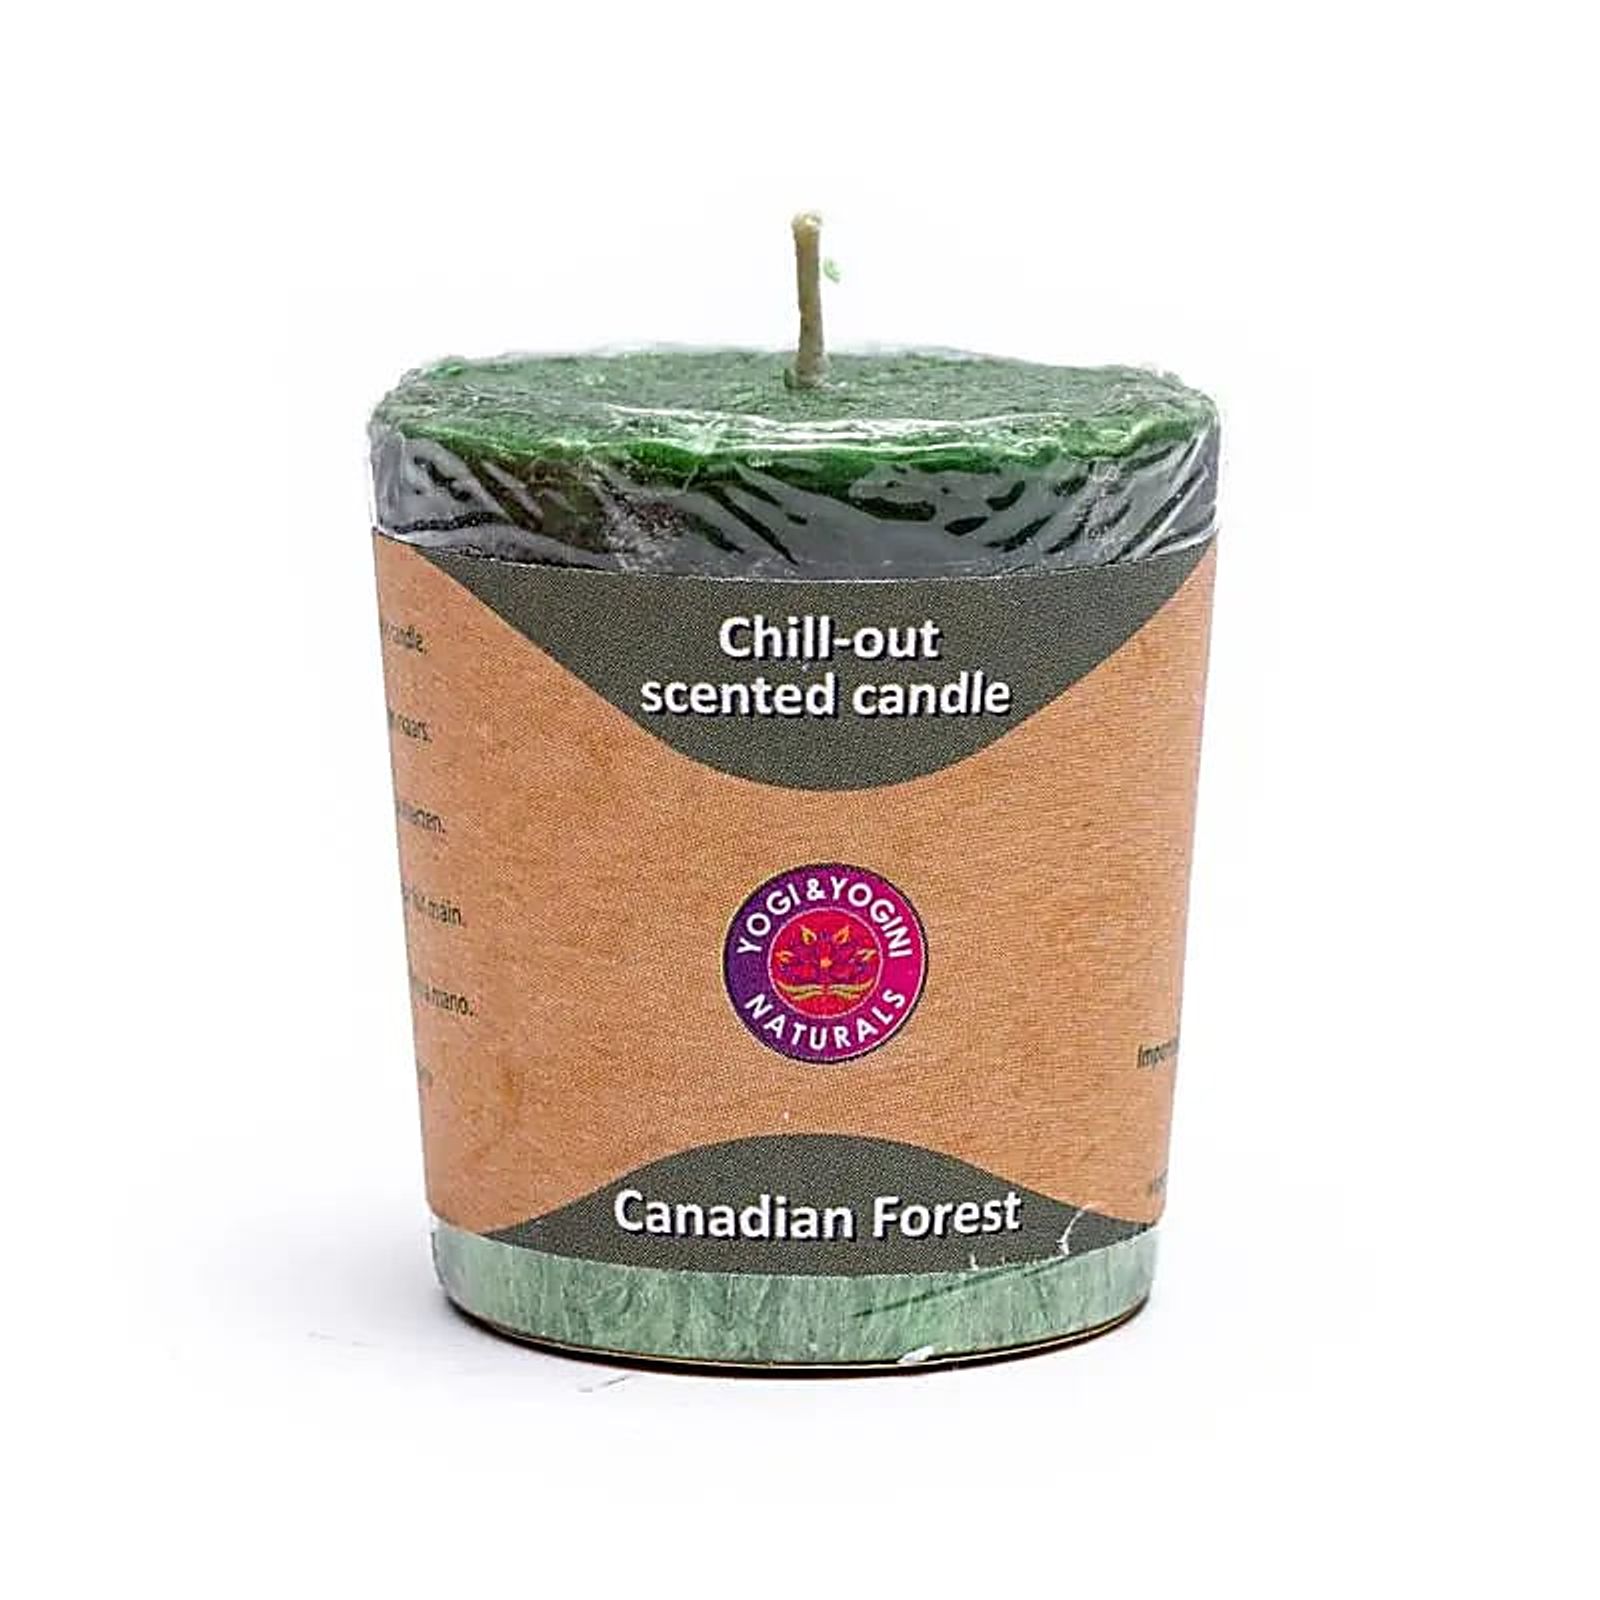 Chill-out Duftkerze 'Canadian Forest' Stearin -- 4.5x4 cm